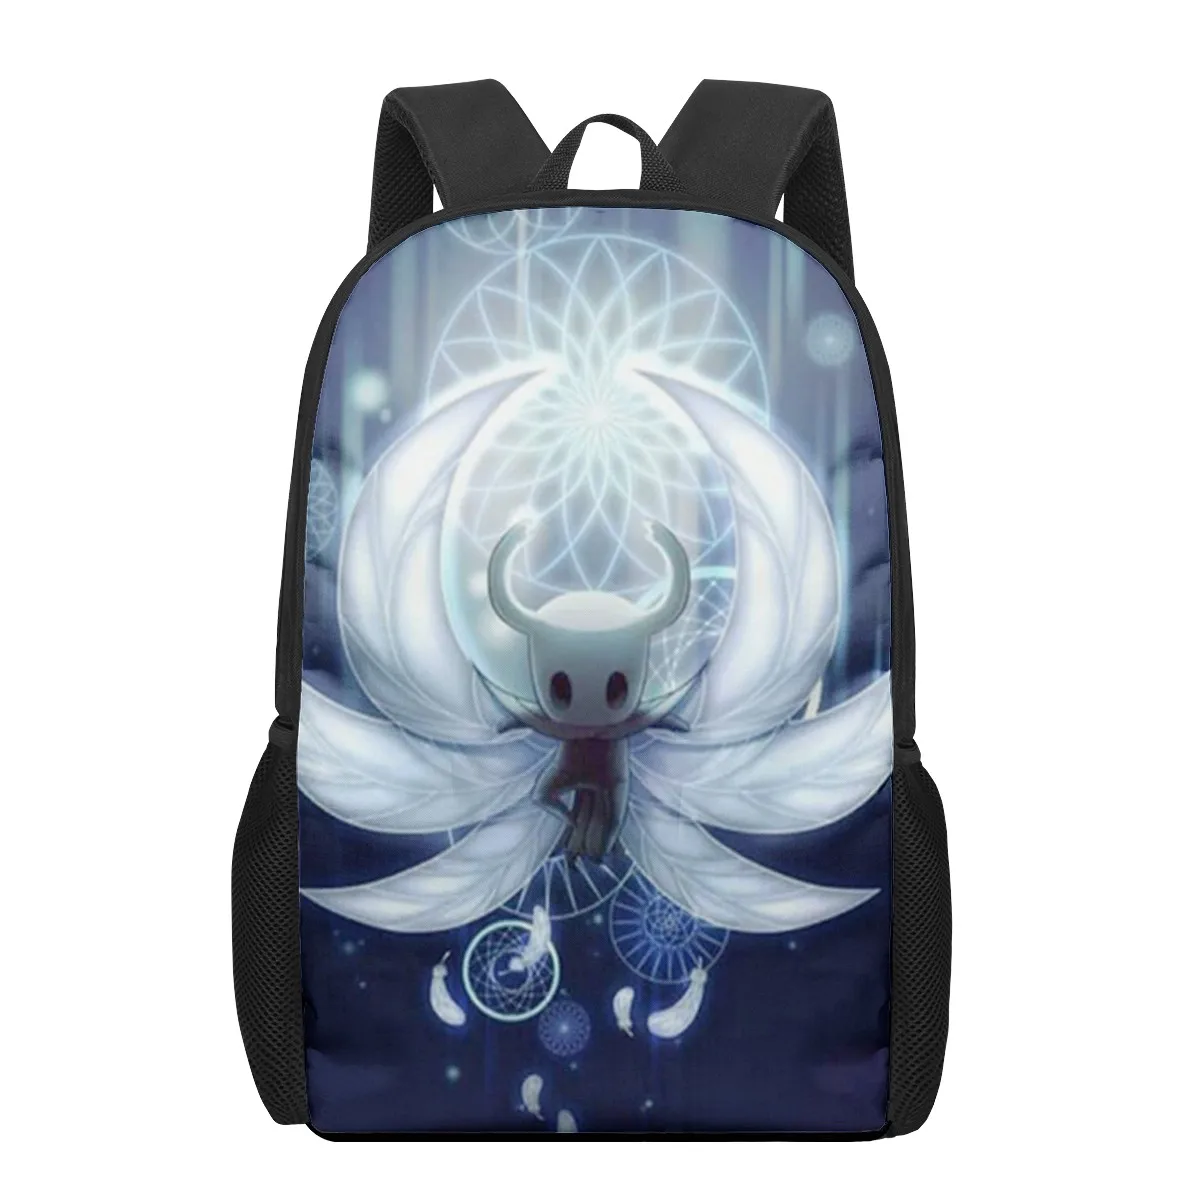 Hollow Knight 3D Pattern School Bag for Children Girls Boys Casual Book Bags Kids Backpack Boys Girls Schoolbags Bagpack